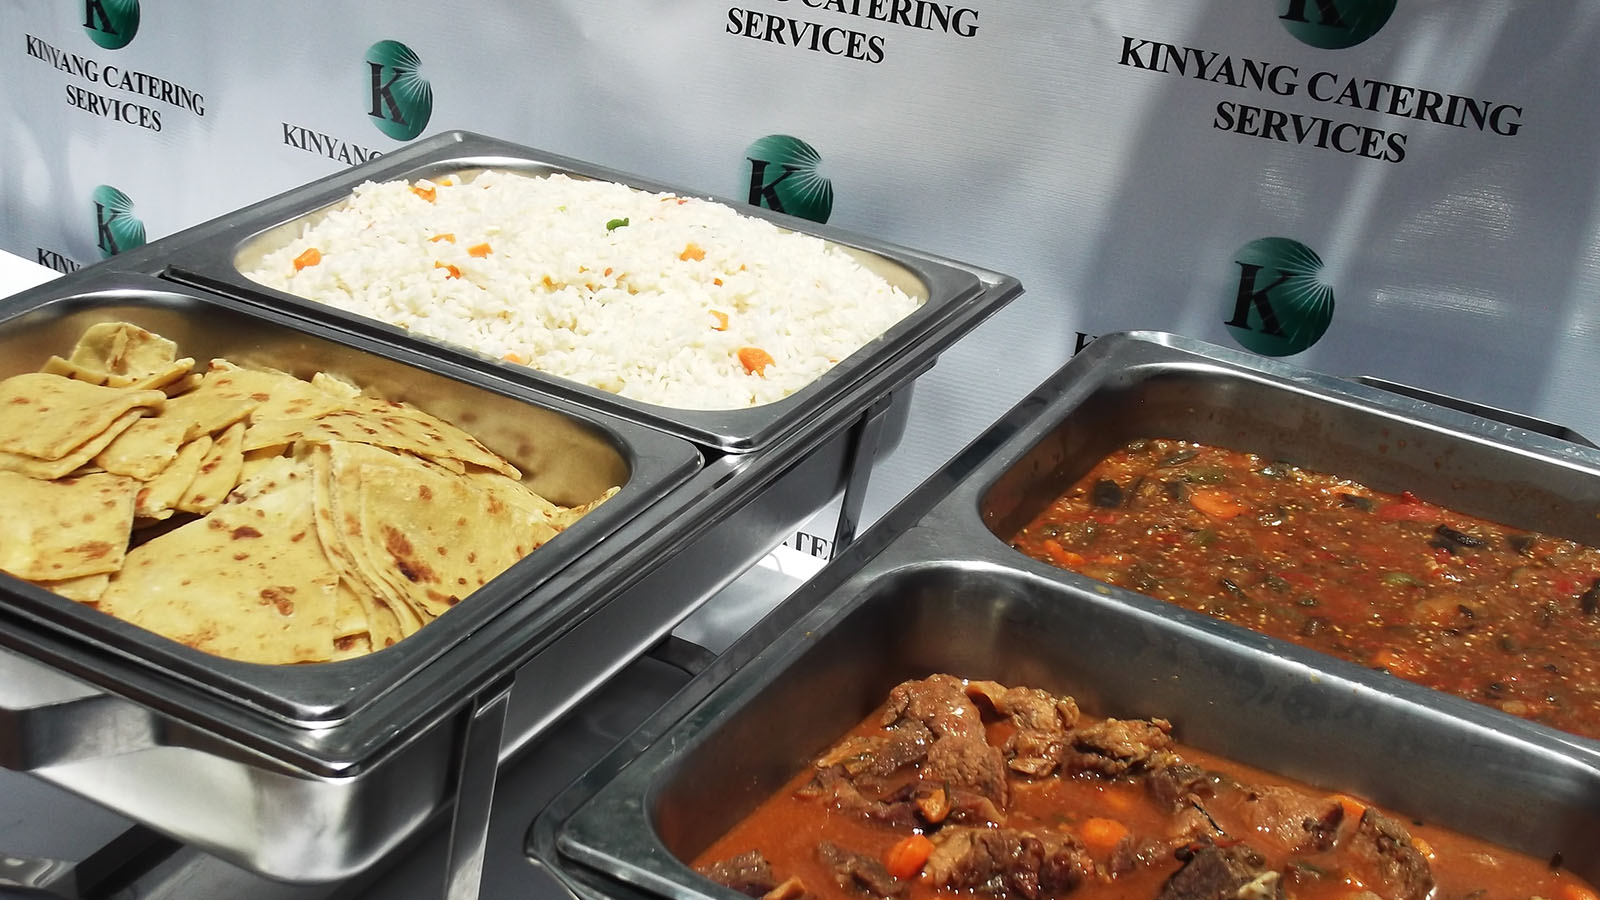 Kinyang Catering Services Limited